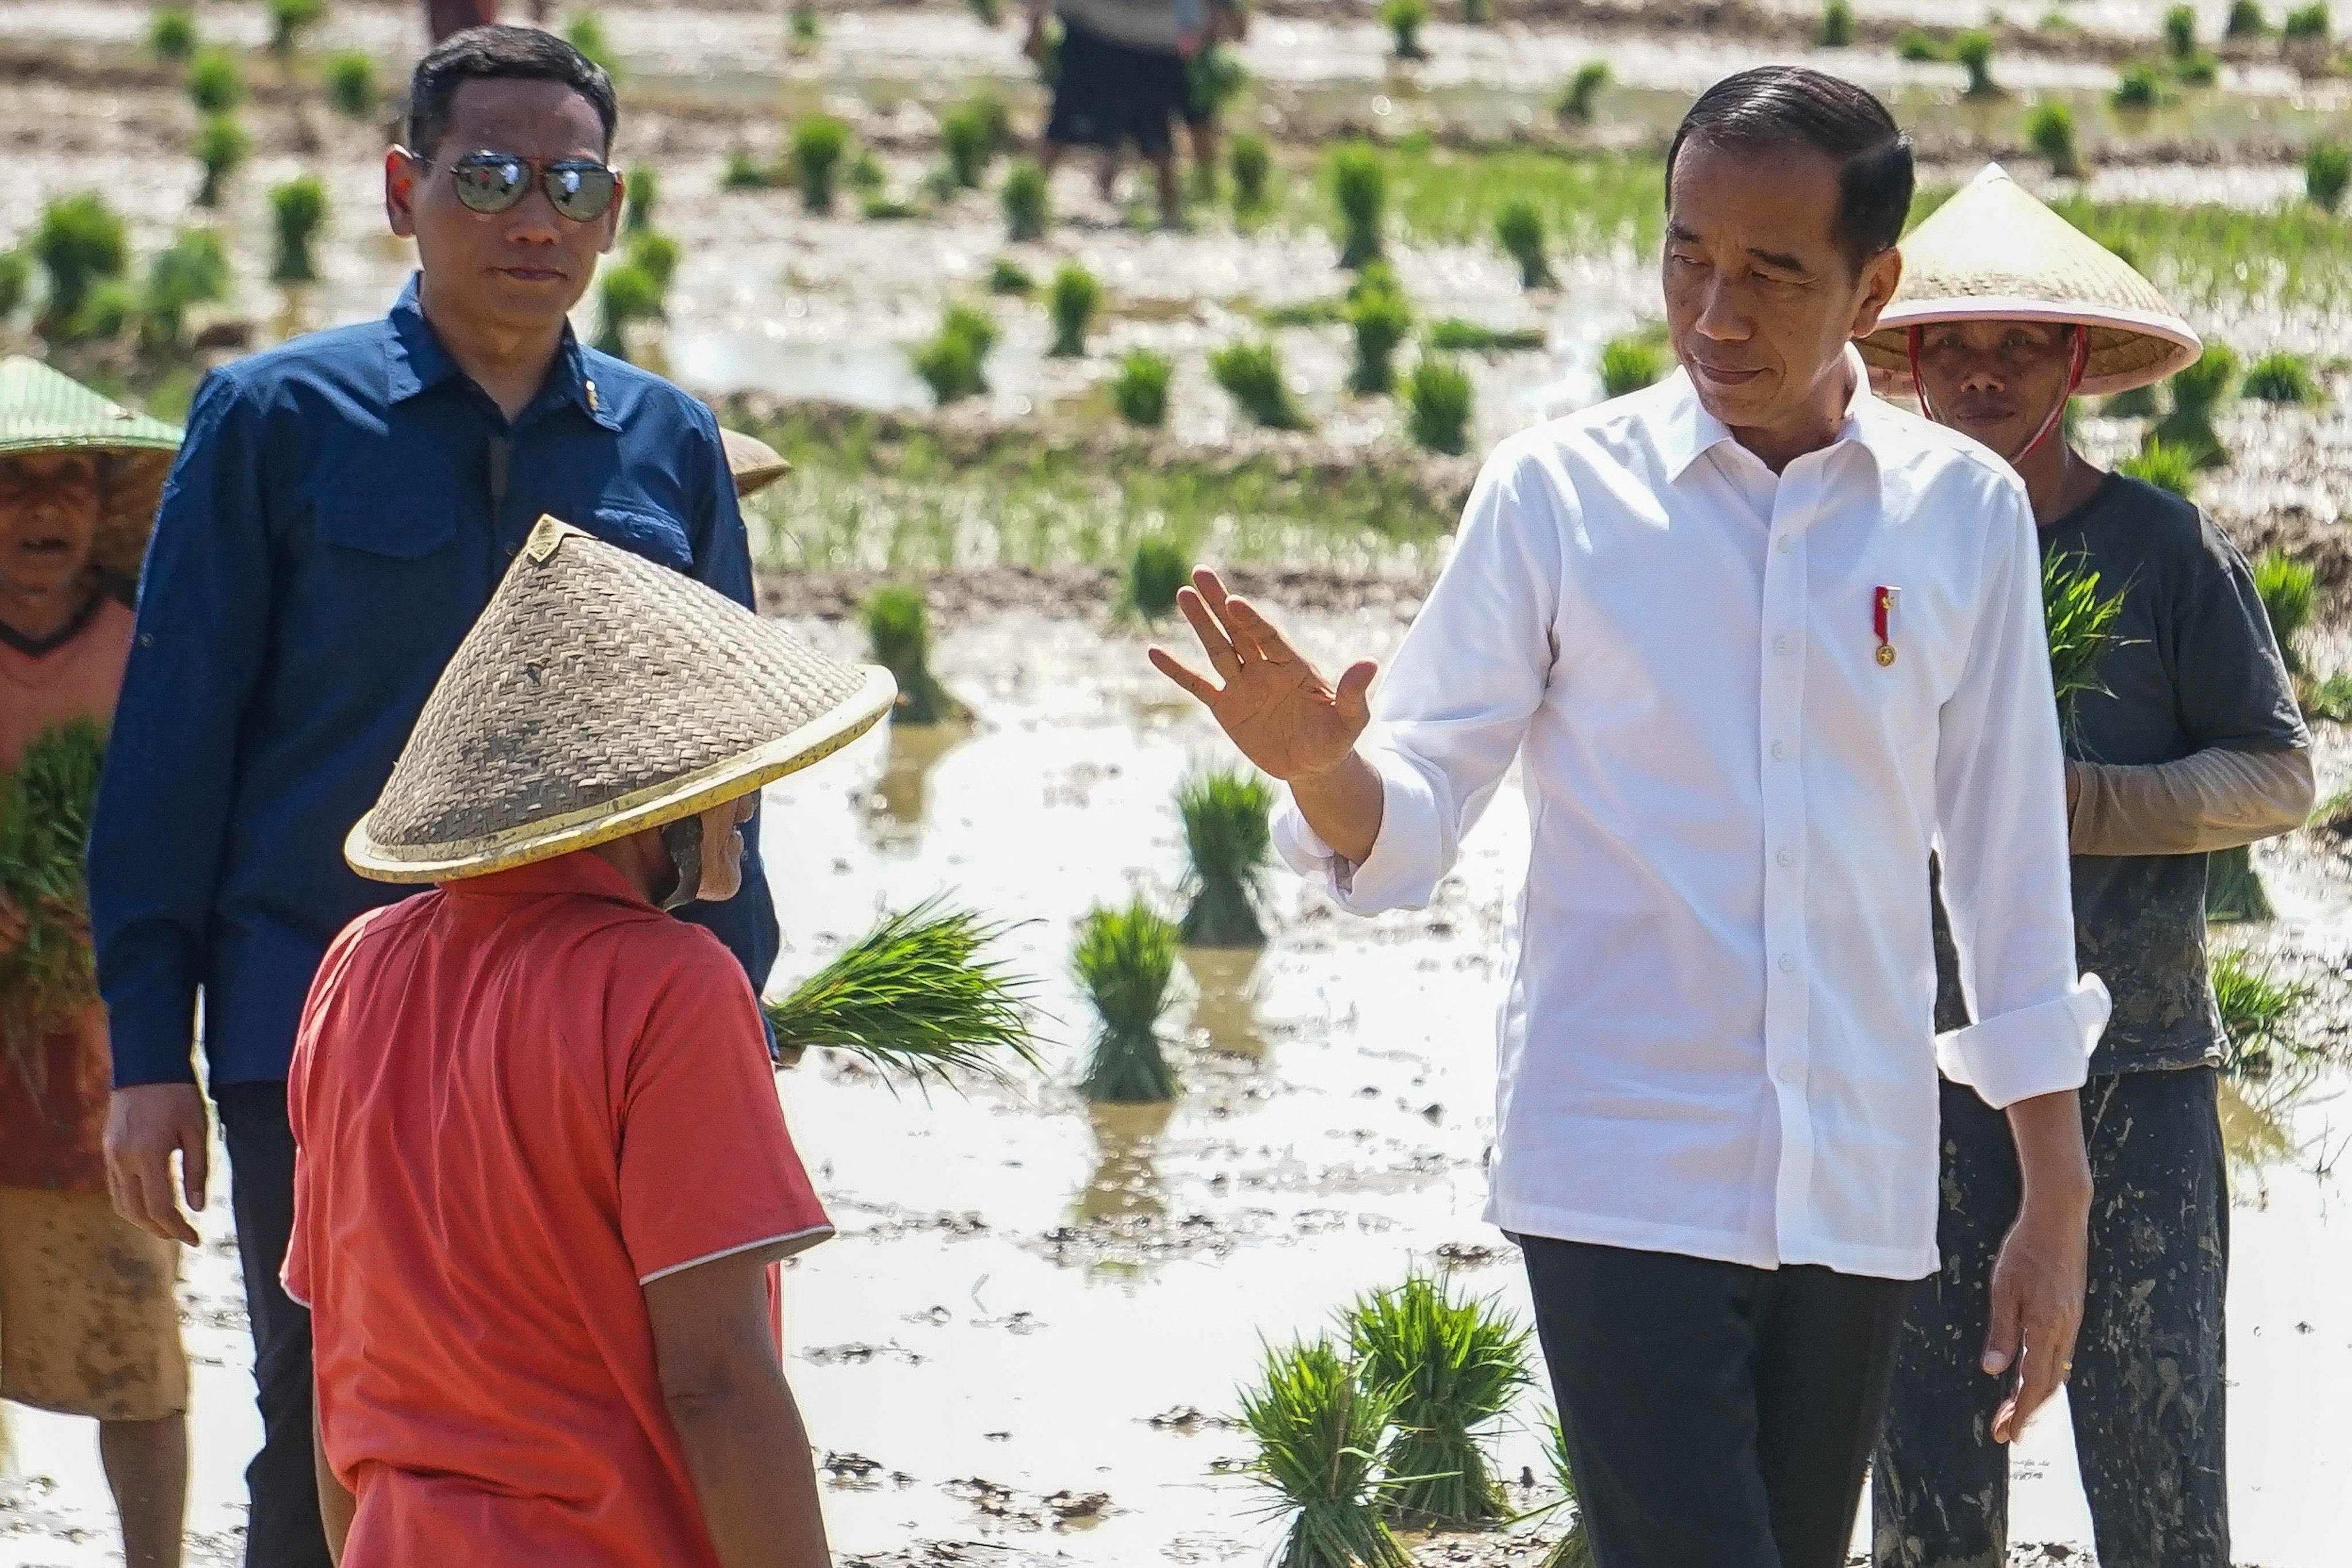 Indonesian President Joko Widodo greets a farmer at the paddy field area in Pekalongan, Central Java province, on December 13. He is pushing Indonesia to join the OECD in less than four years. Photo: Antara via Reuters